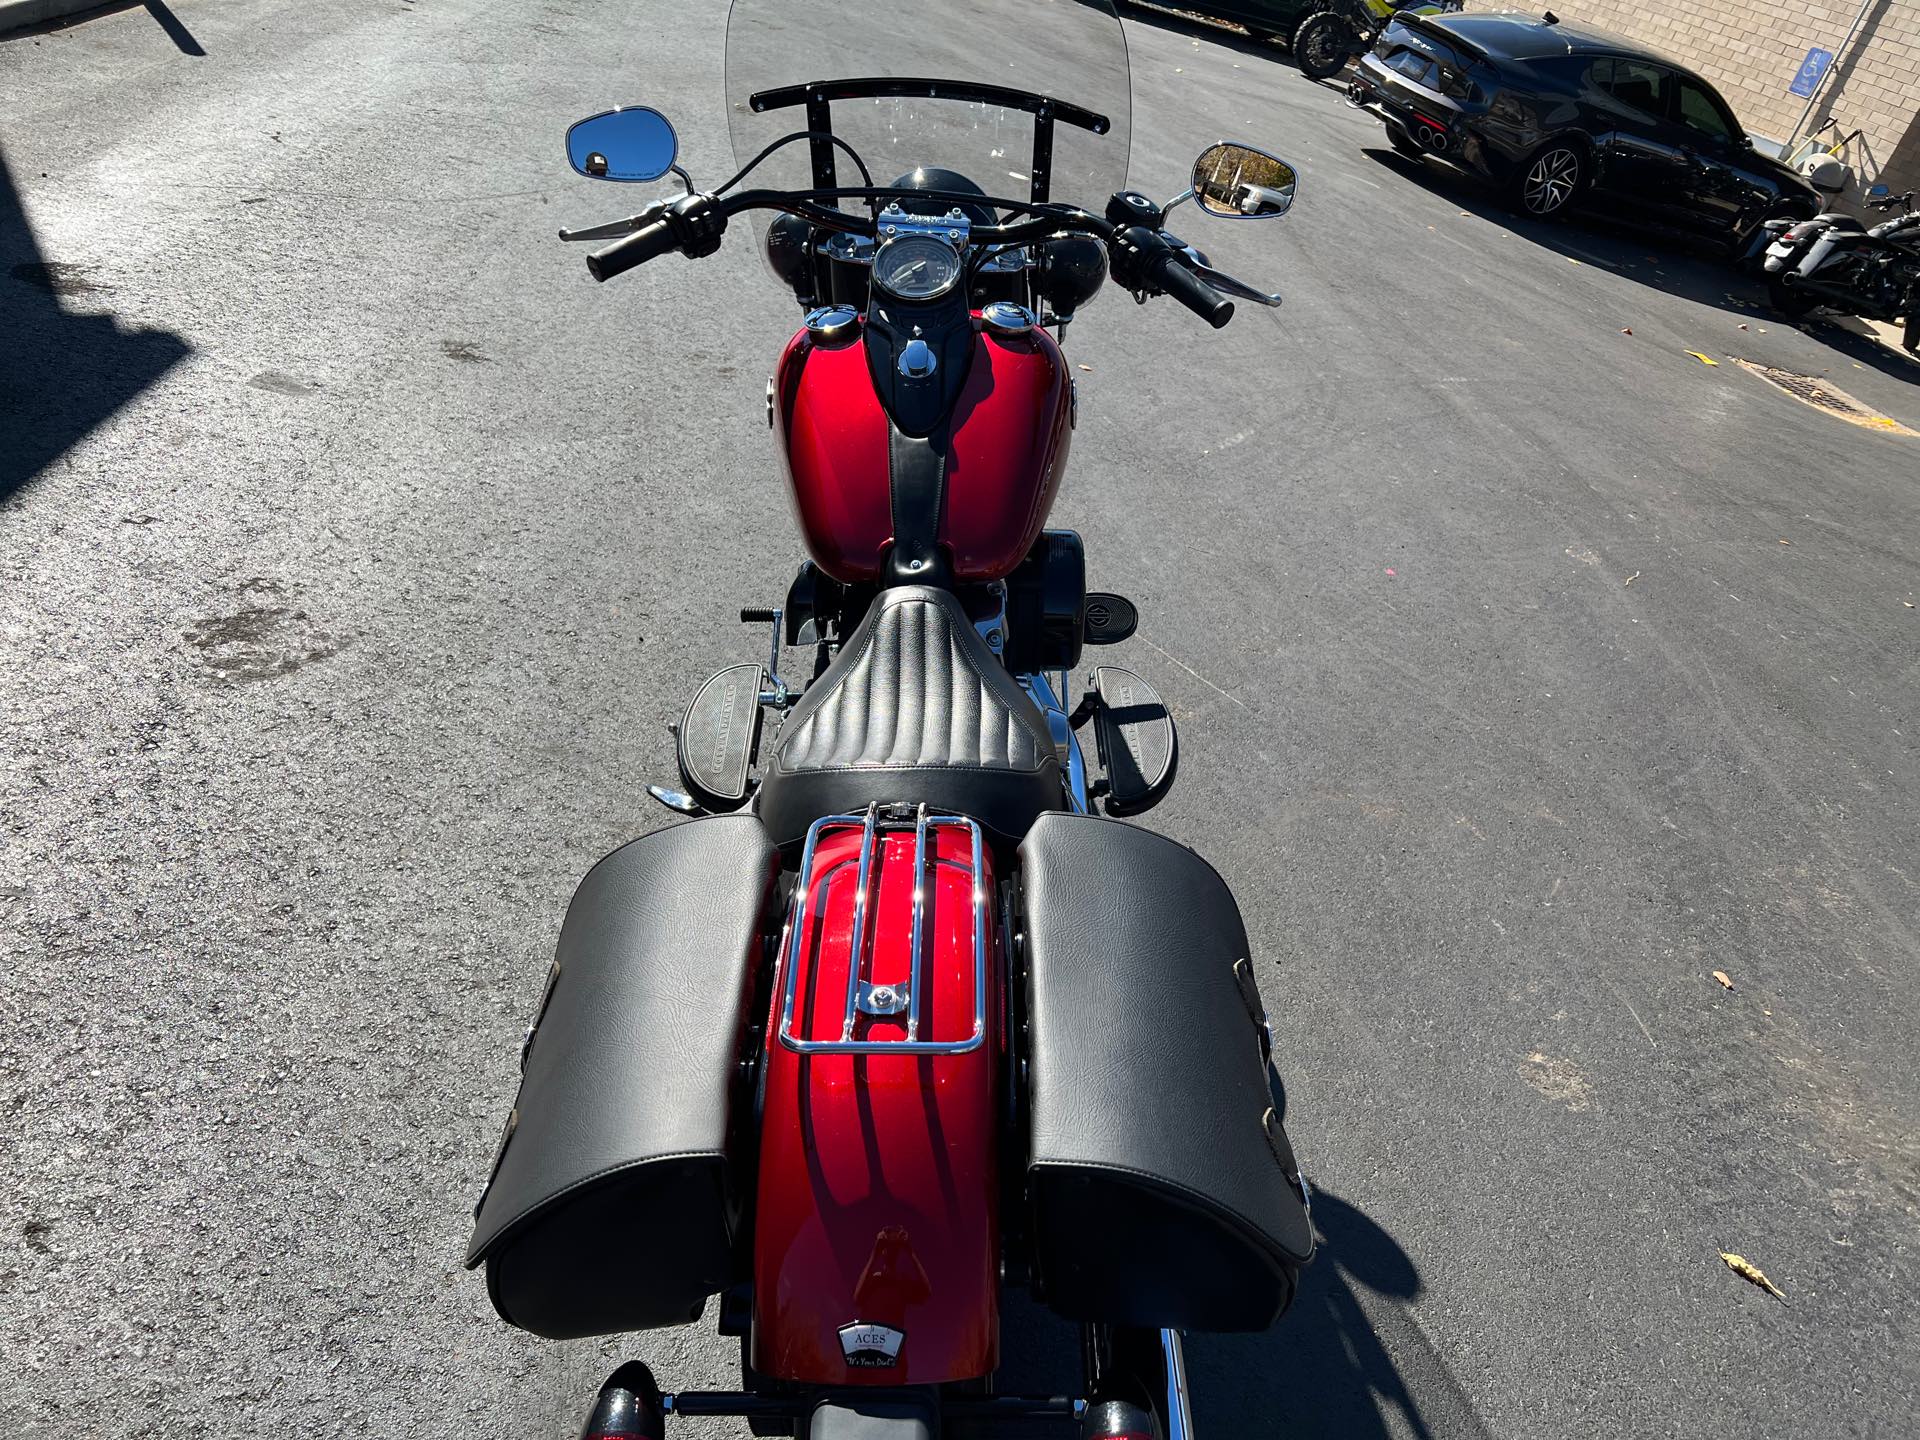 2012 Harley-Davidson Softail Slim at Aces Motorcycles - Fort Collins